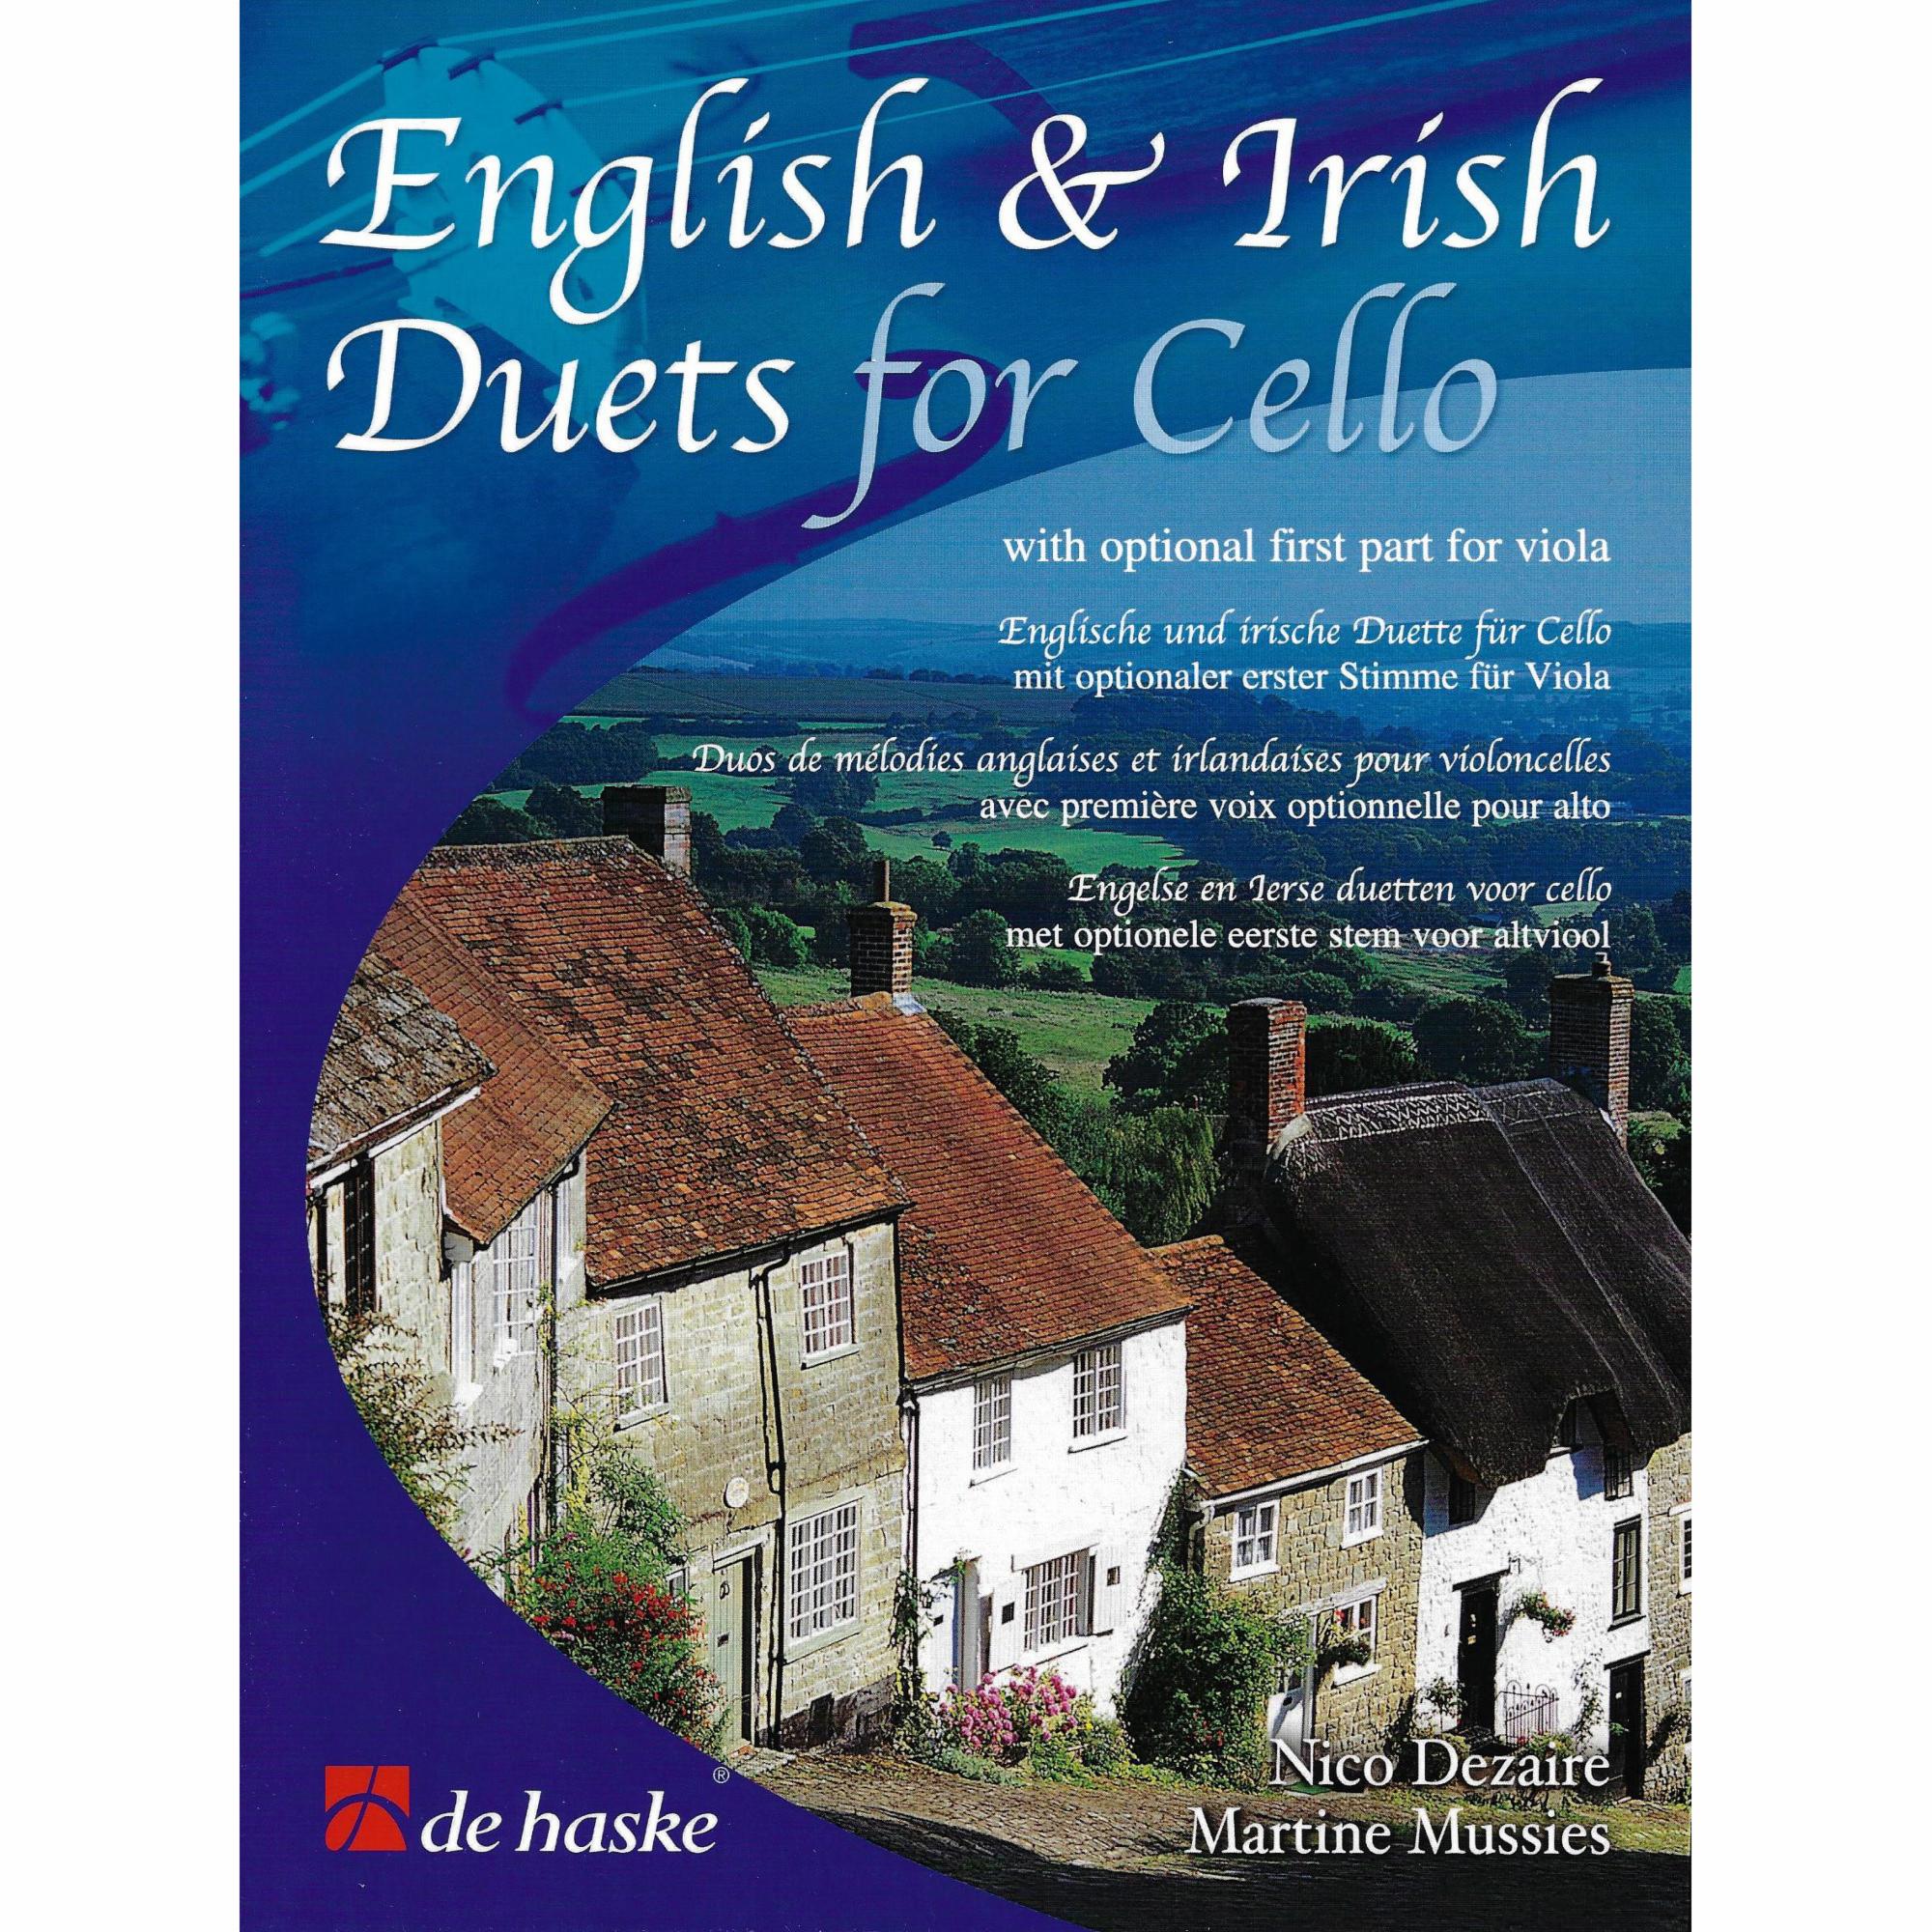 English and Irish Duets for Twos Cellos